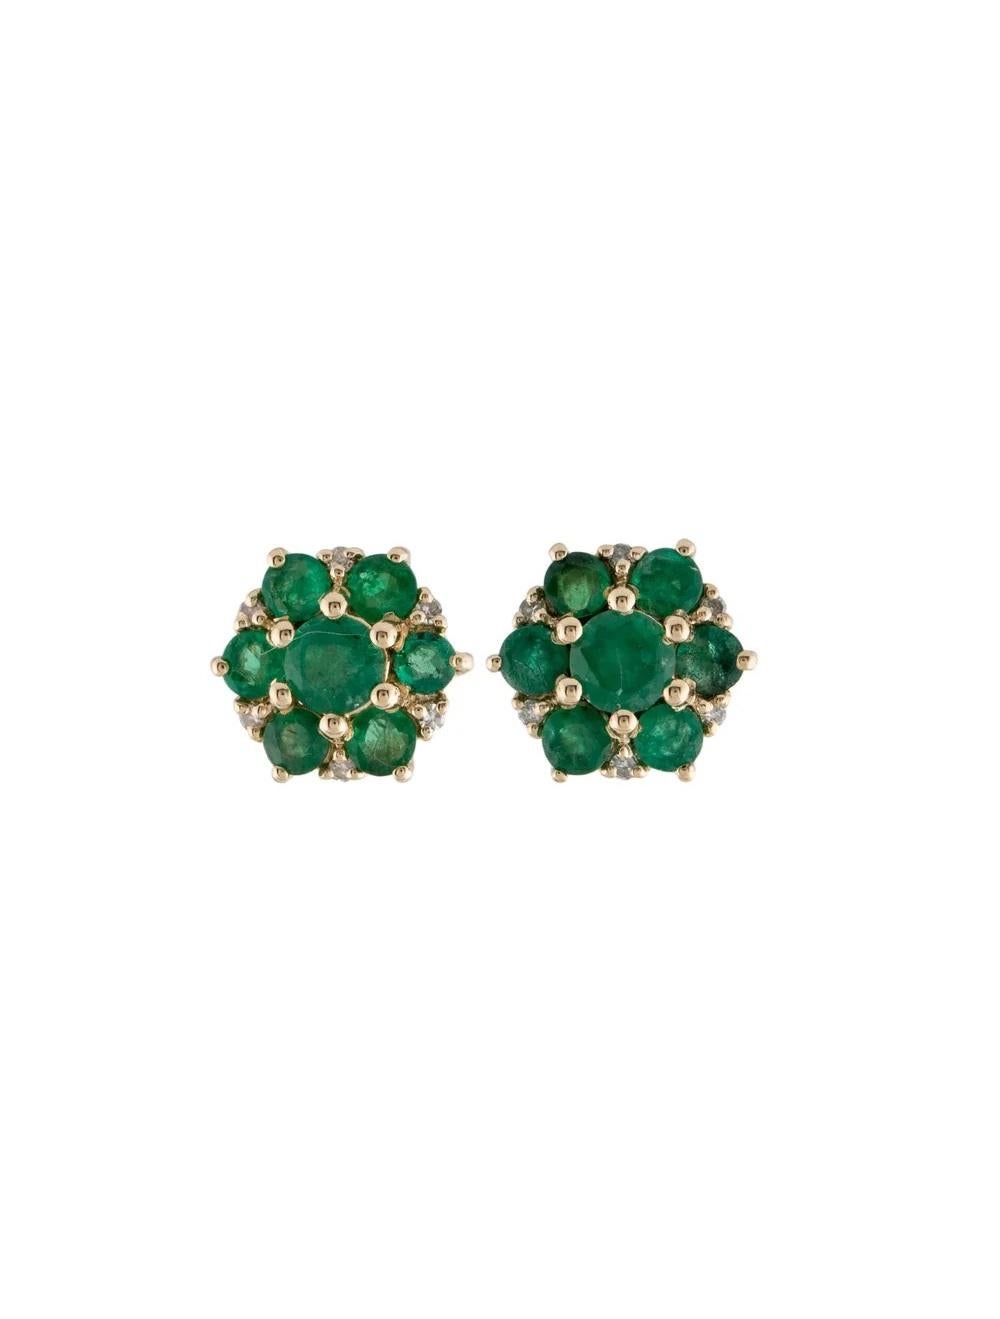 14K Emerald & Diamond Stud Earrings, 1.96ctw - Classic Design, Green Gemstones In New Condition For Sale In Holtsville, NY